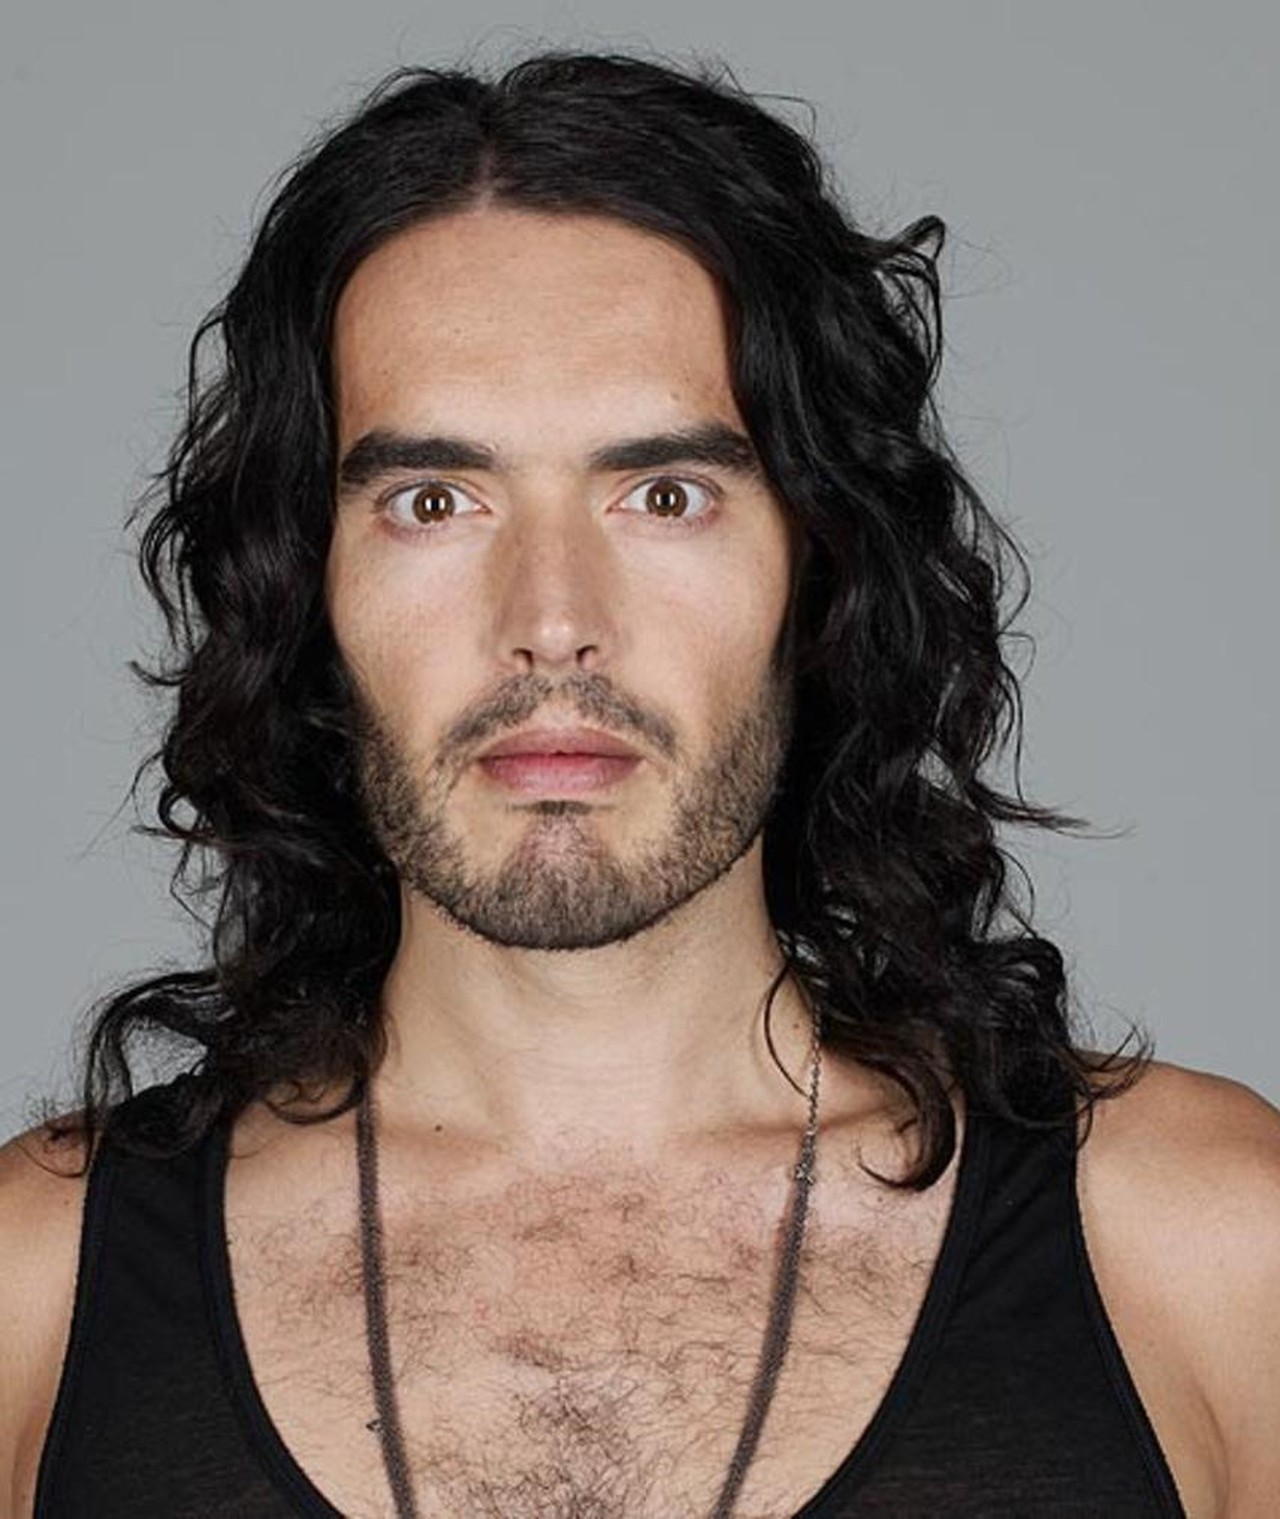 Russell Brand Movies, Bio and Lists on MUBI